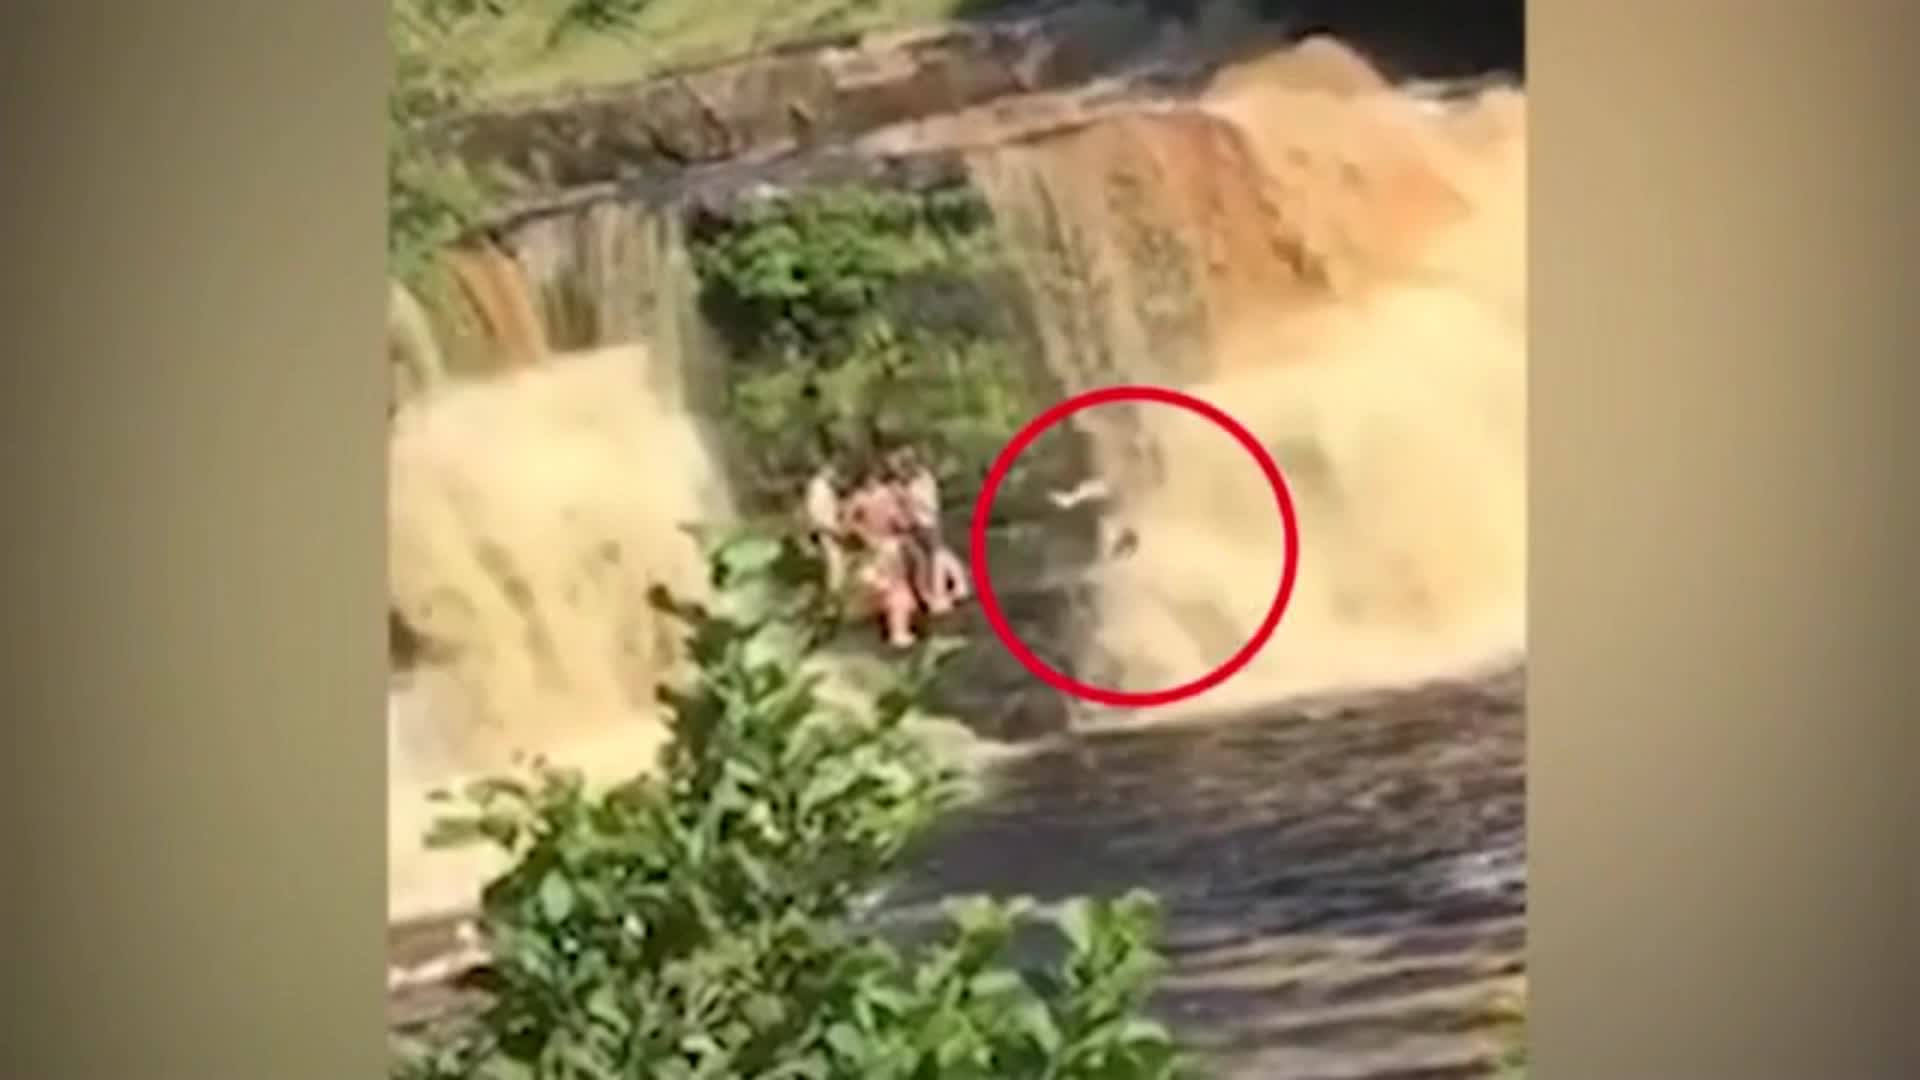 Britain's 17-year-old boy survived a 9-metre waterfall by a torrent with only minor injuries